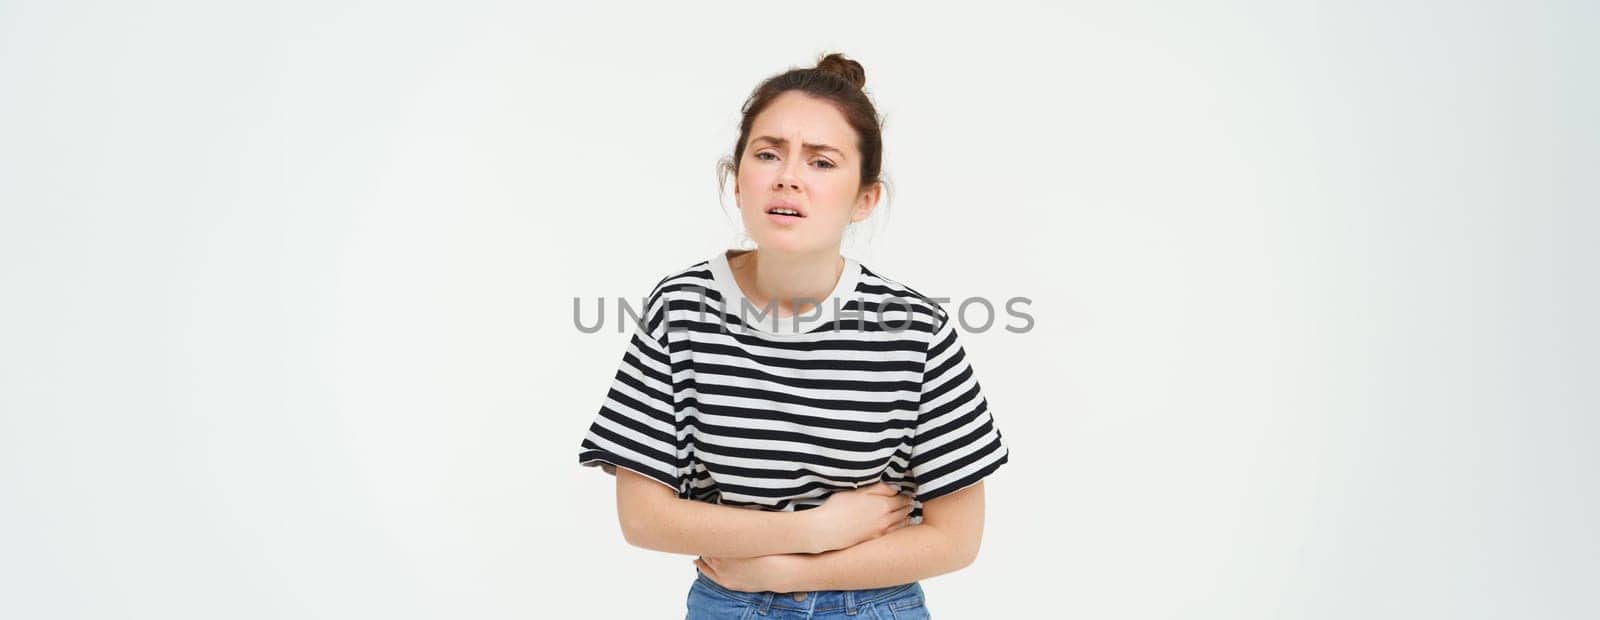 Image of young woman holding hands on her belly, feeling discomfort, menstrual period cramps, needs painkillers, stands over white background.